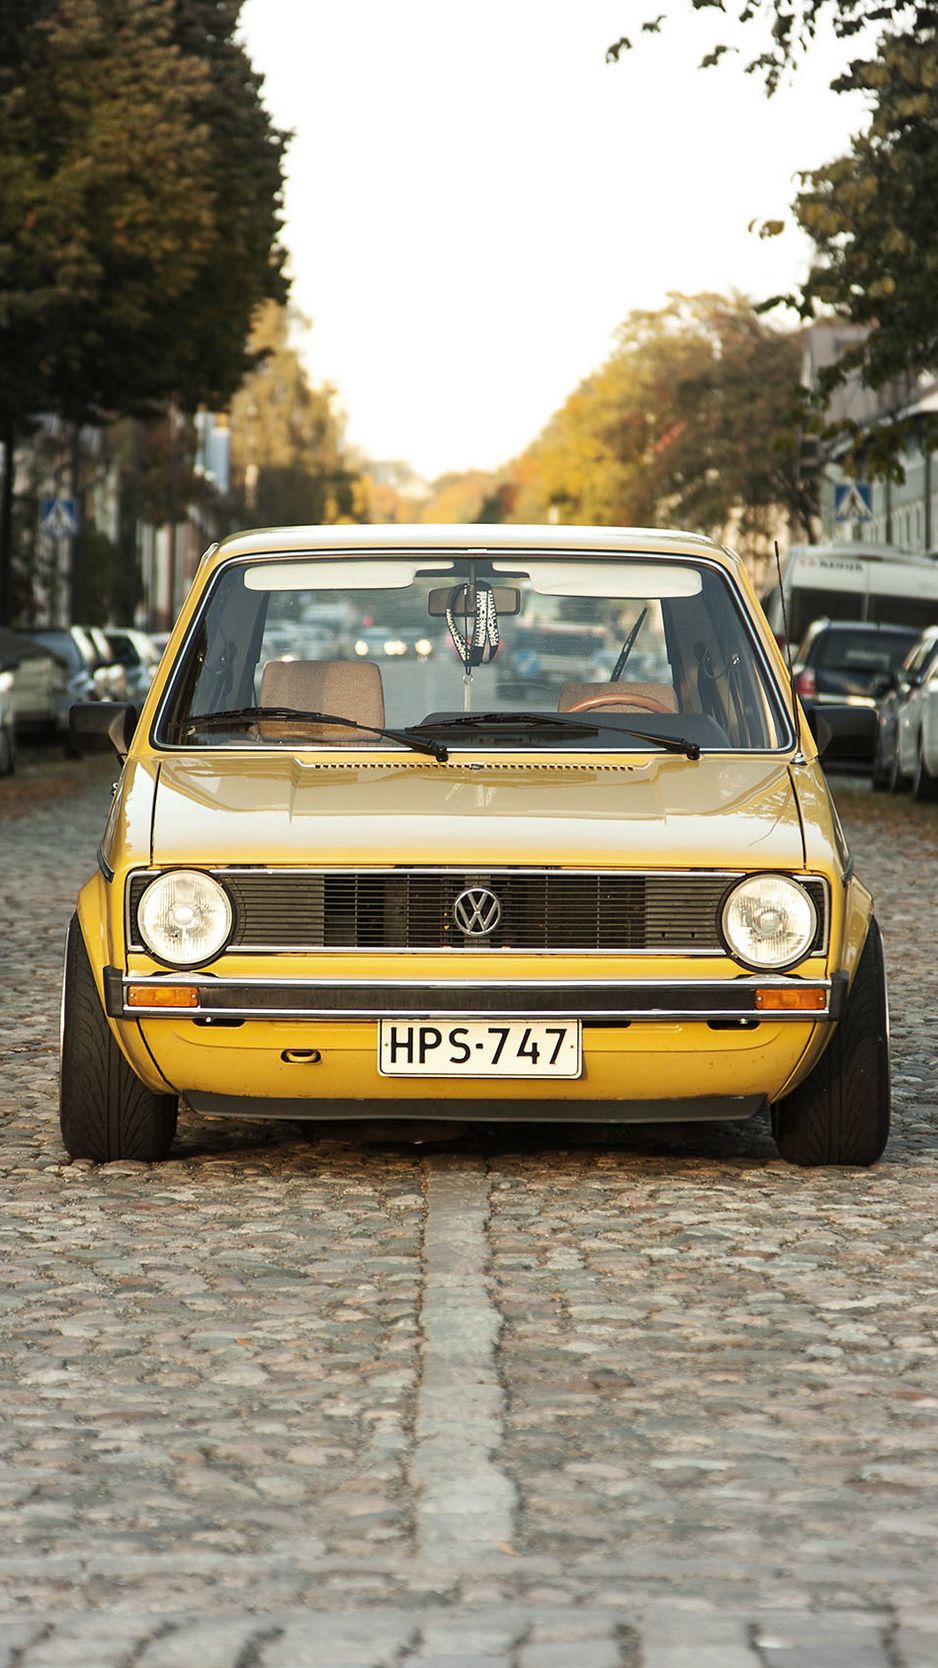 Vw Iphone Wallpapers